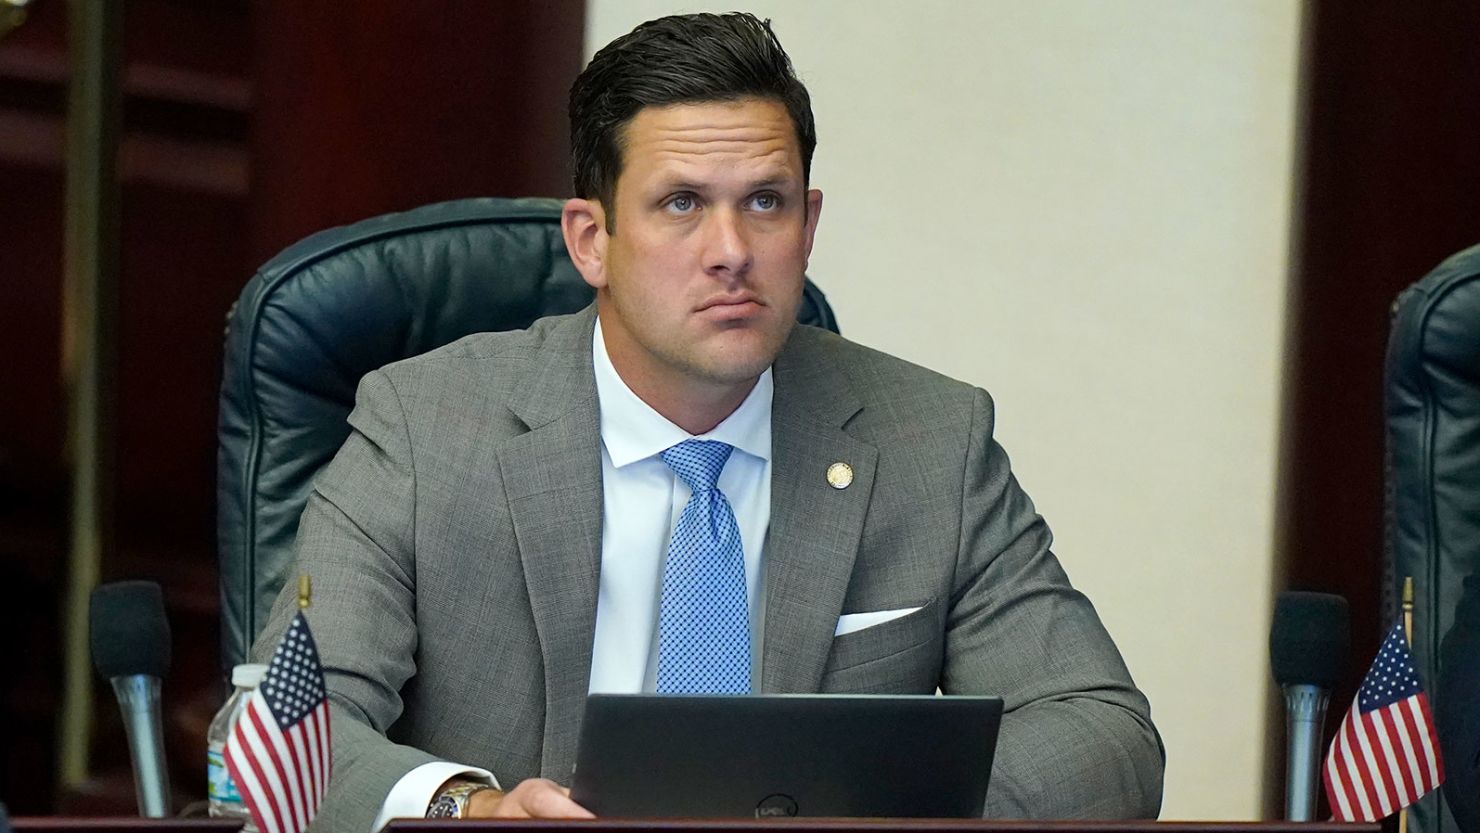 Florida state Rep. Joe Harding during a legislative session at the Florida State Capitol, March 7, 2022, in Tallahassee.